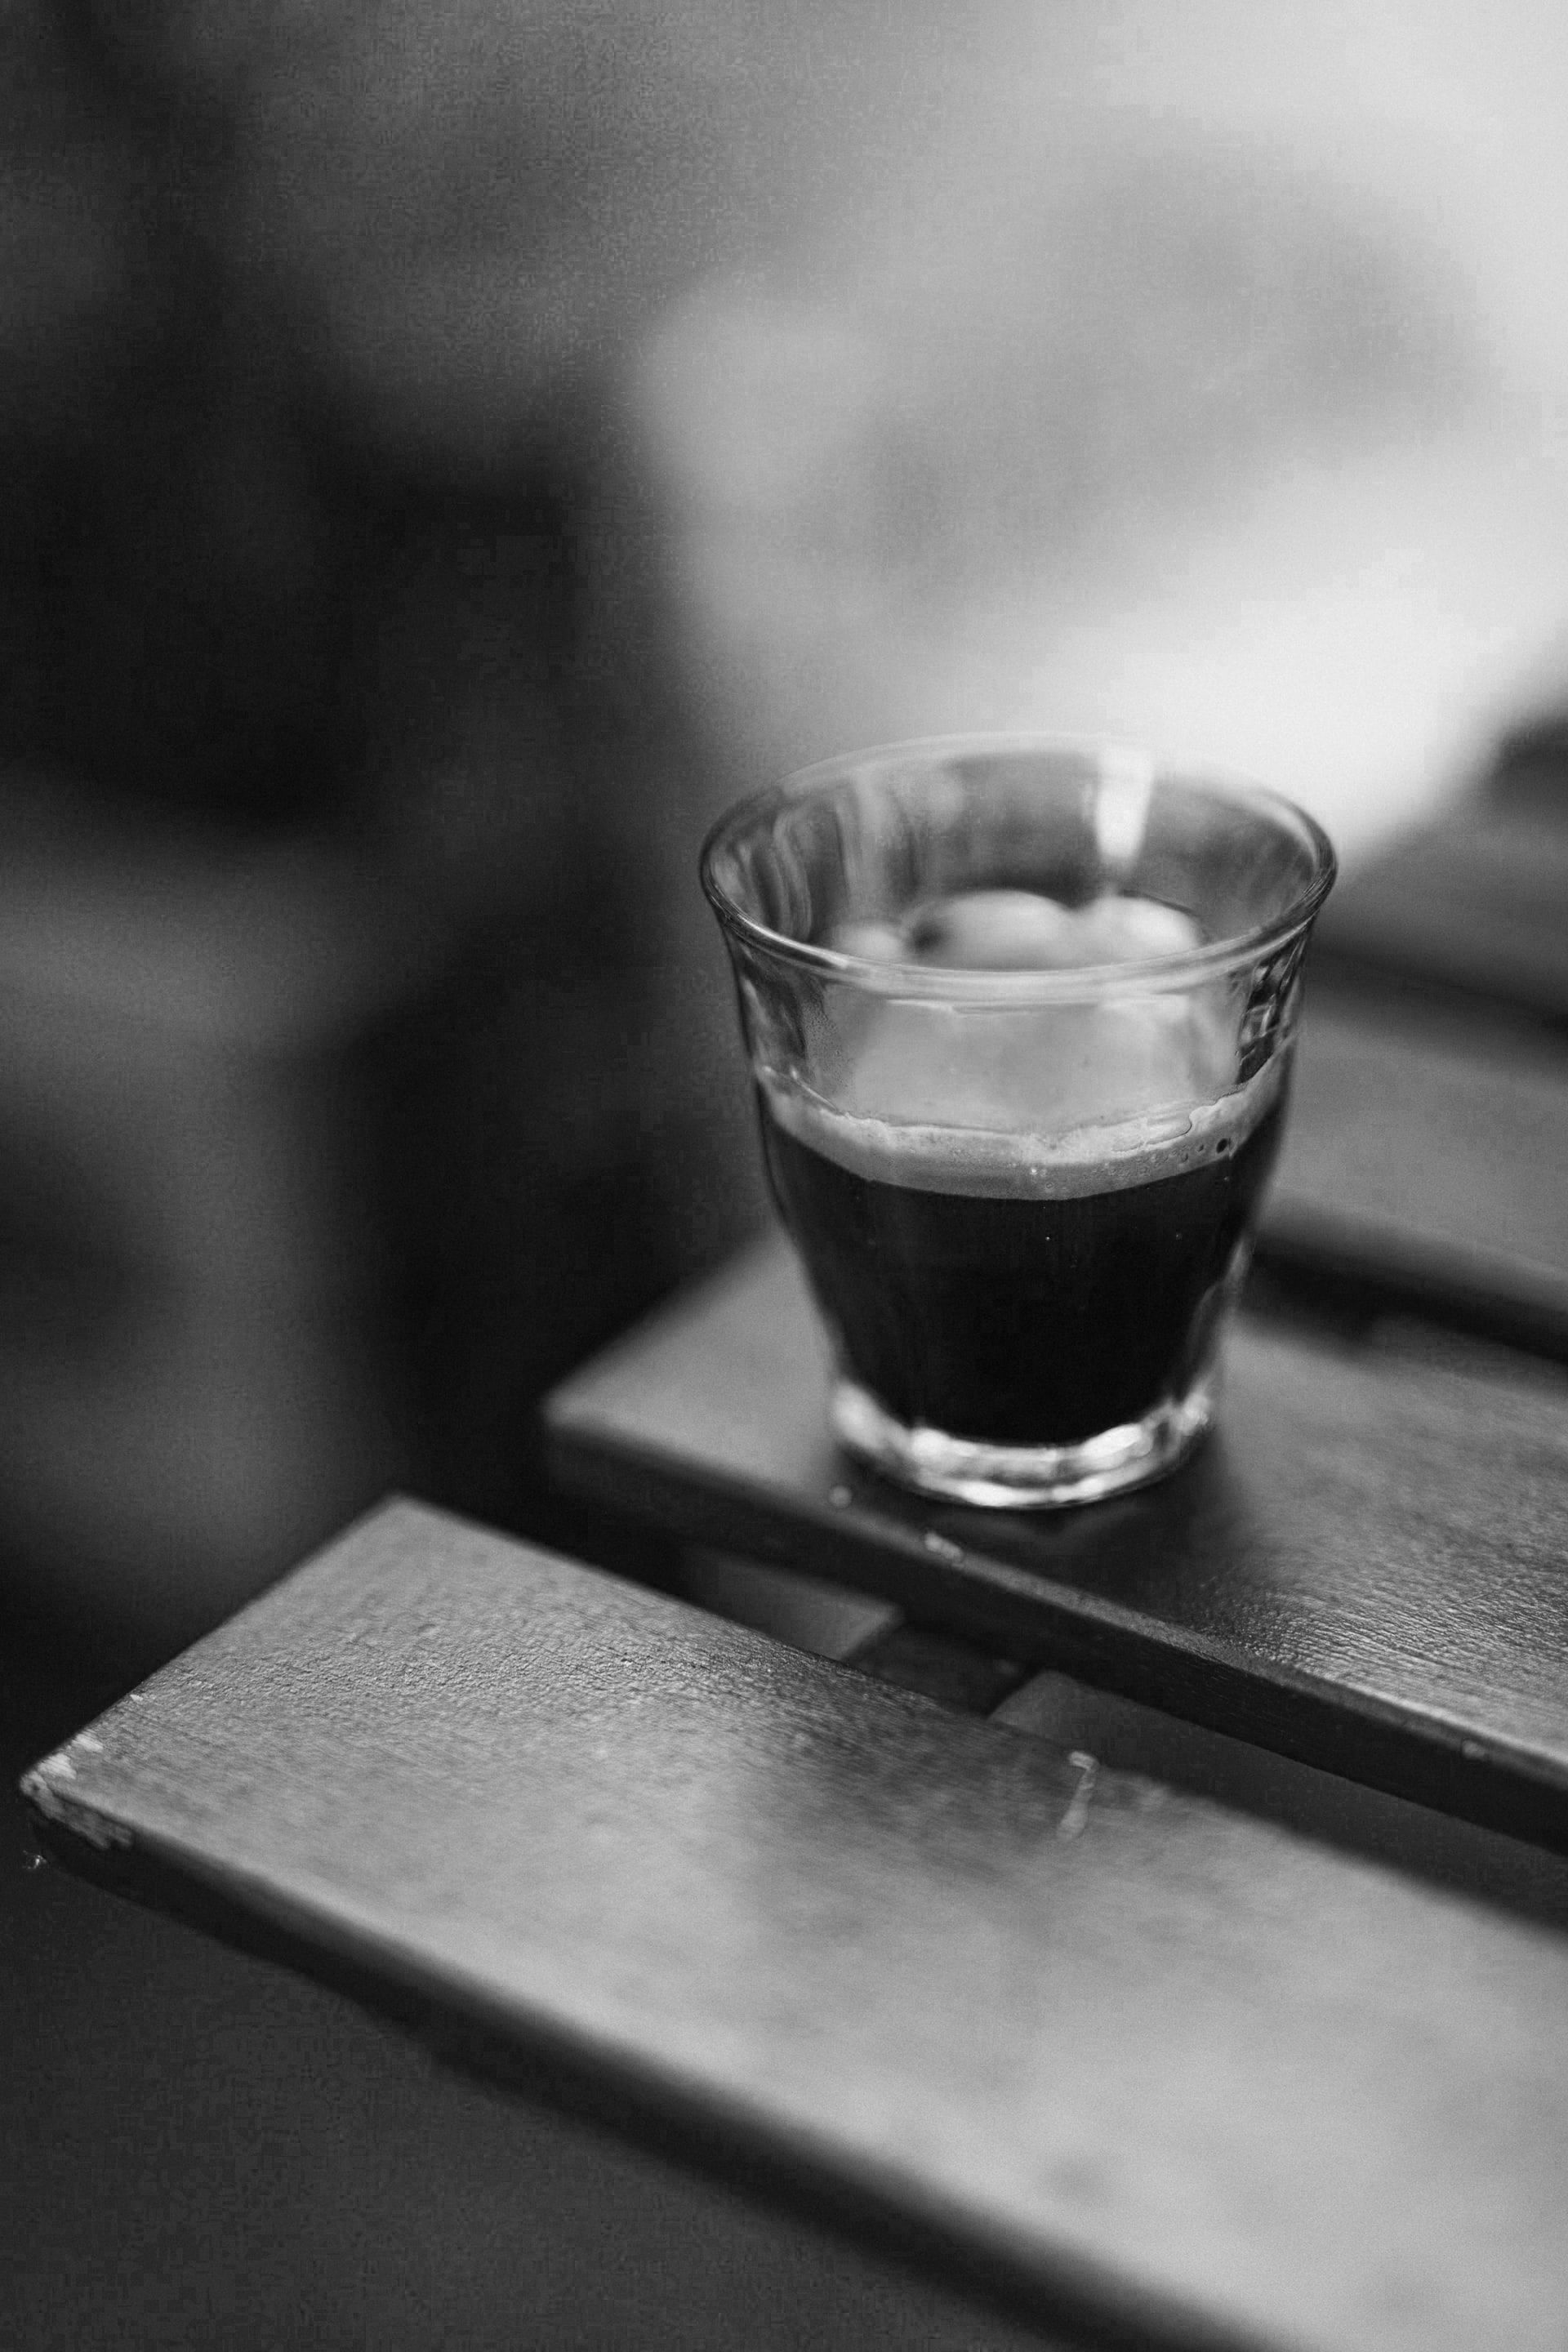 A shot of espresso in a glass on the edge of a wooden table